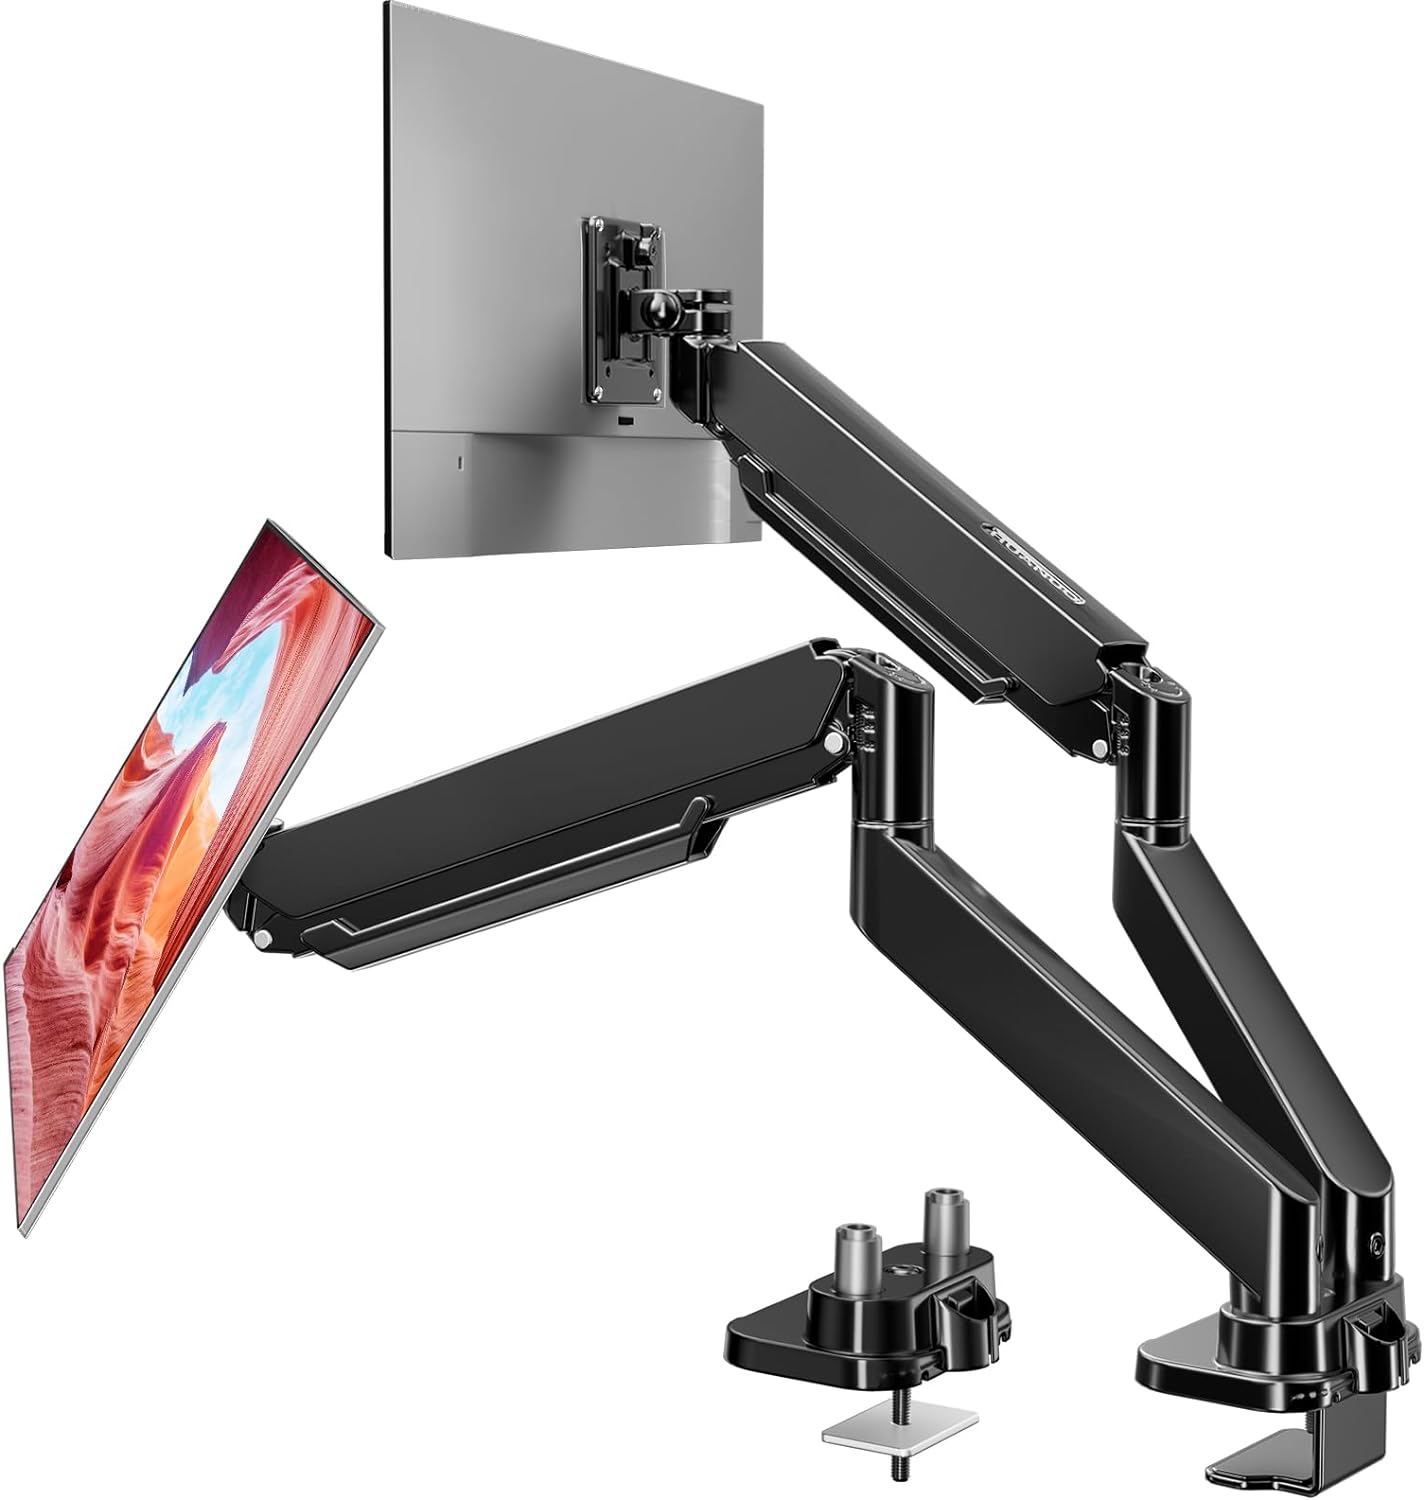 Dual Monitor Mount for 40 inch Ultrawide Screens up to 33 lbs, Dual Monitor Stand with Gas Spring Full Motion Adjustment